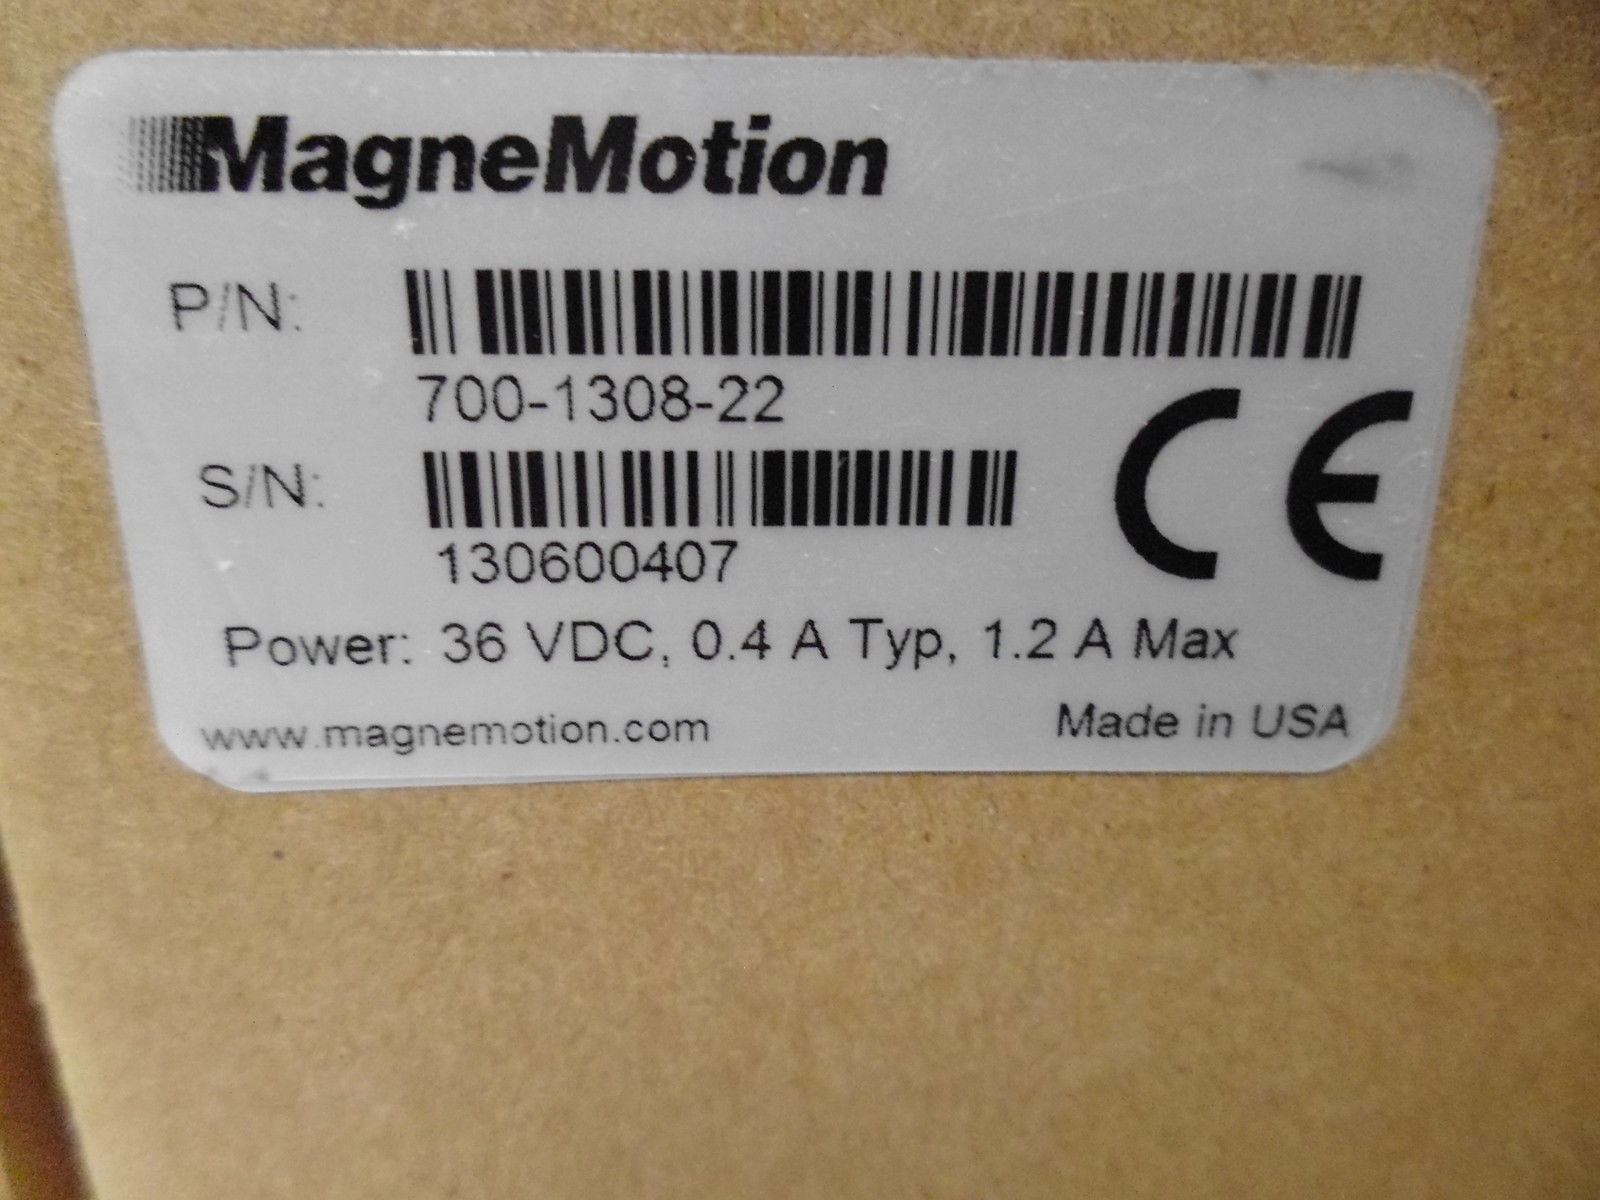 MAGNEMOTION 700-1308-22 *NEW IN BOX*